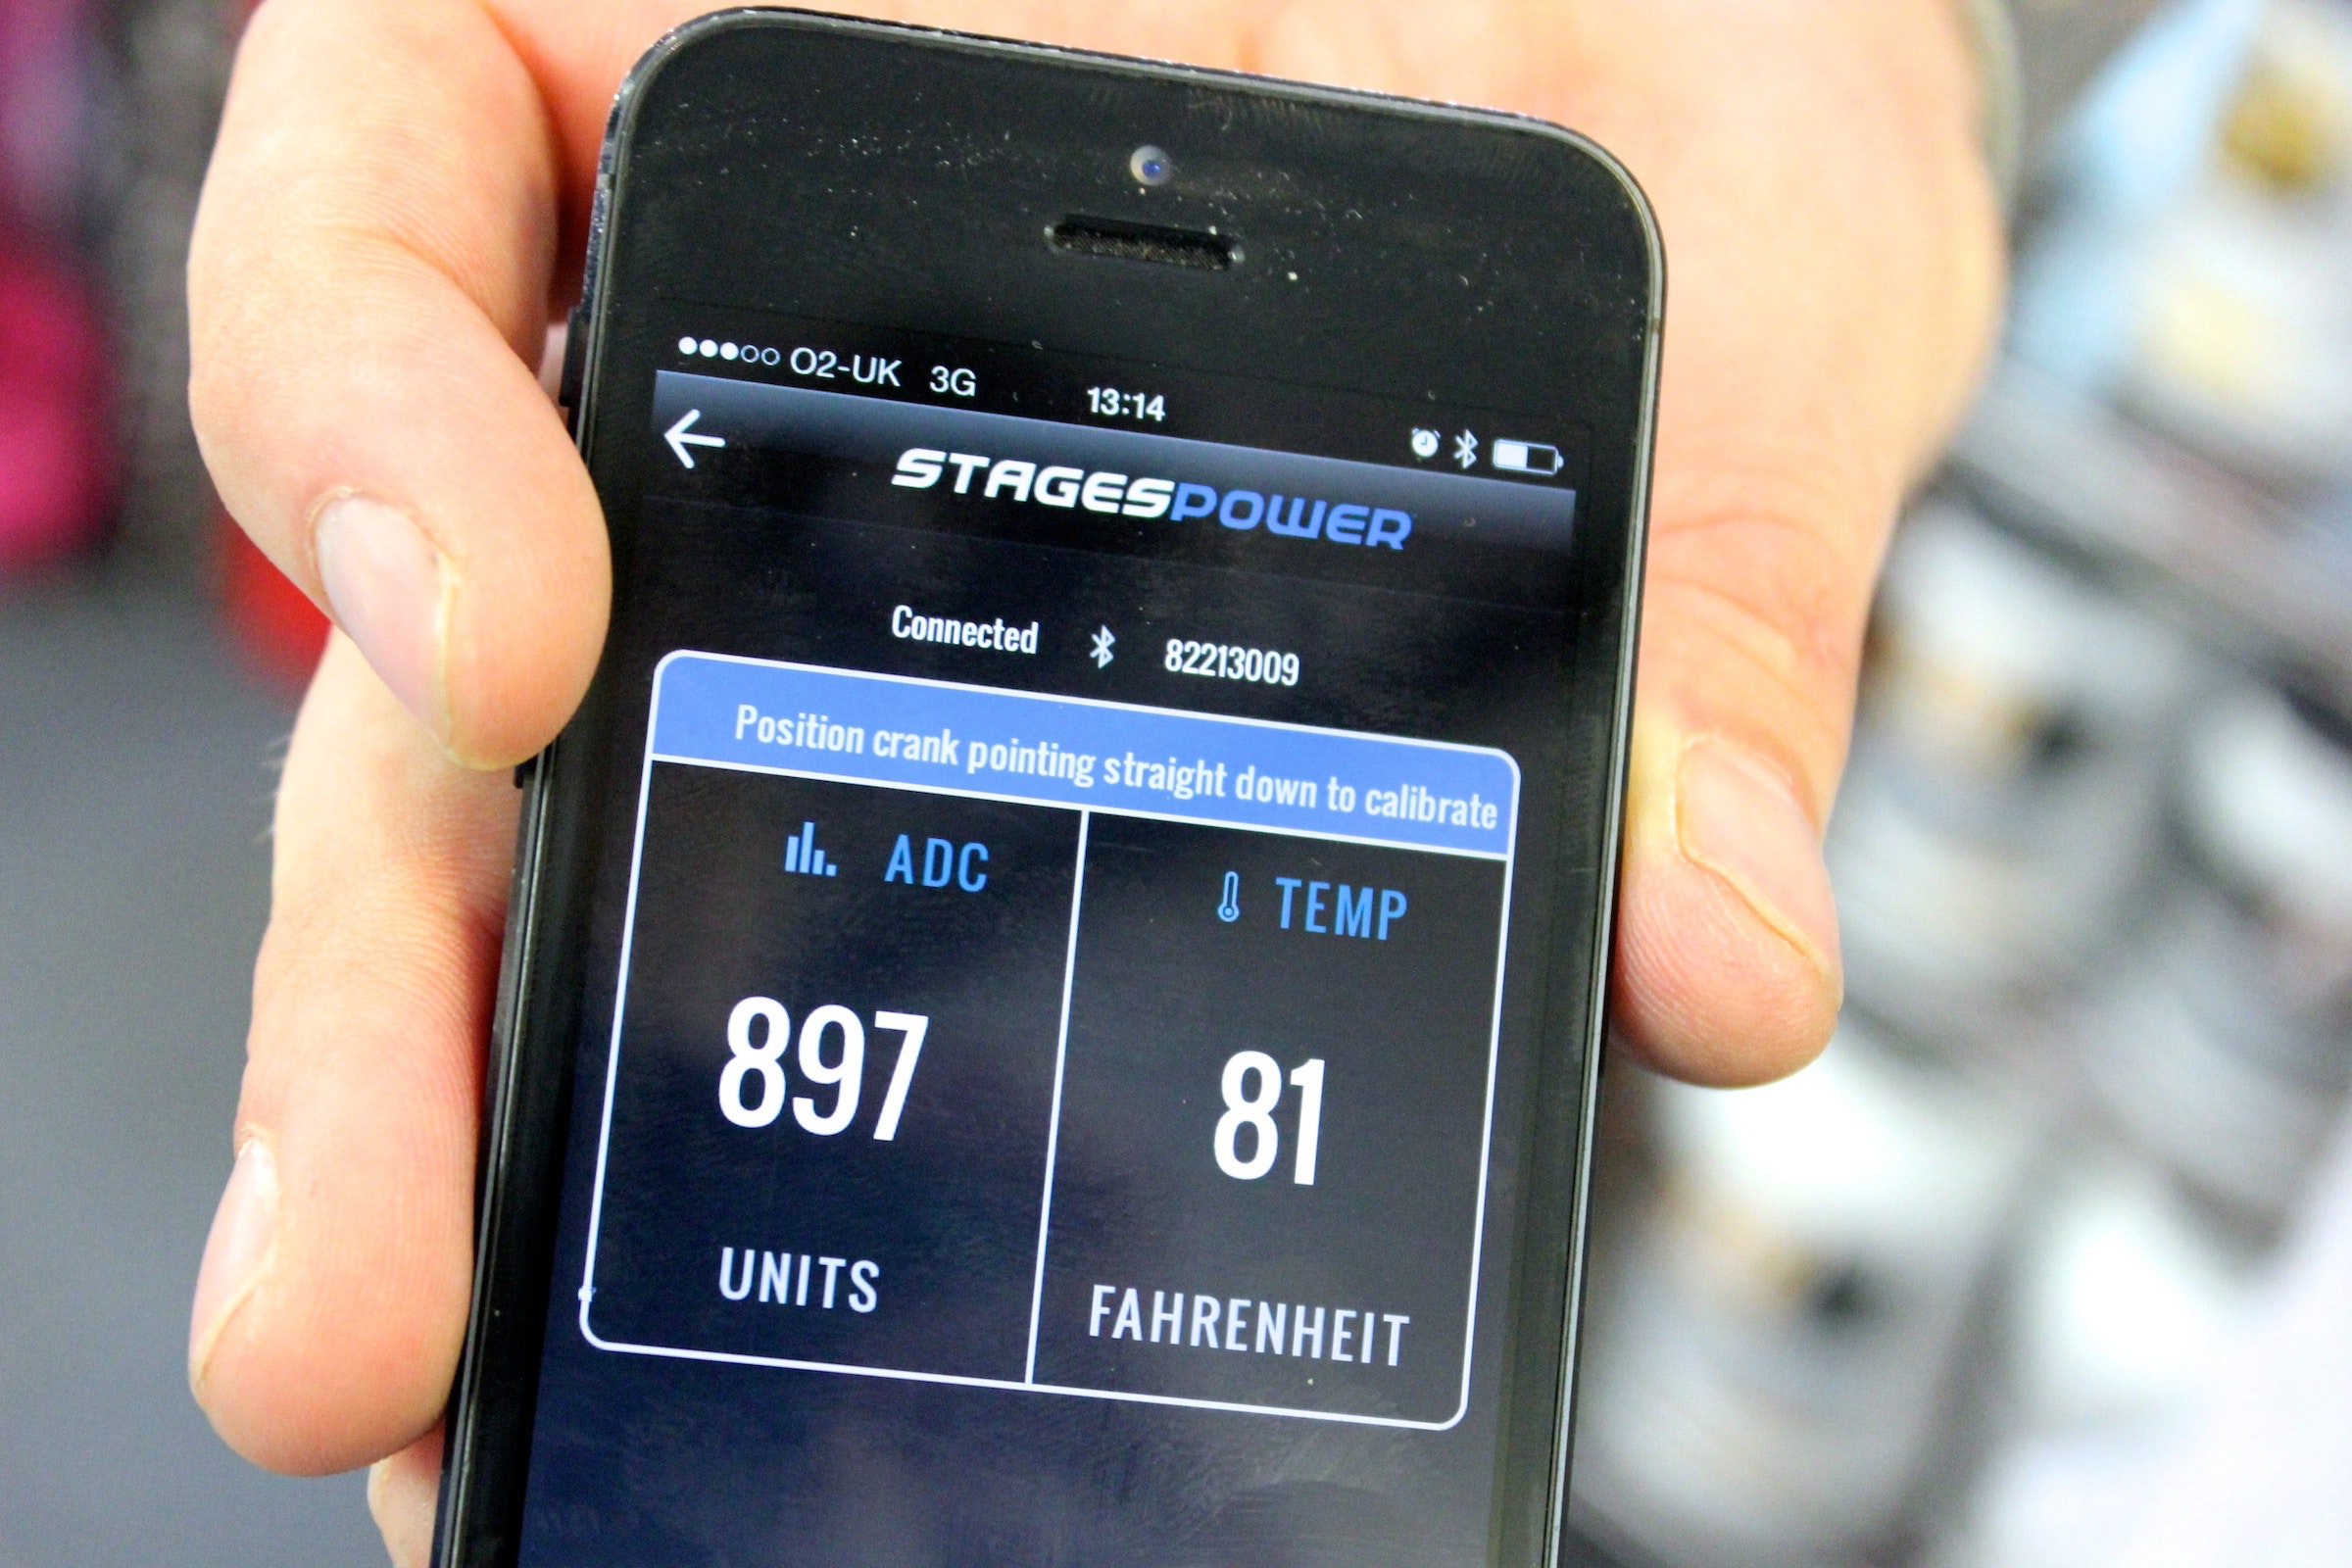 Stages power meter, iPhone App, pic: Timothy John, ©Factory Media